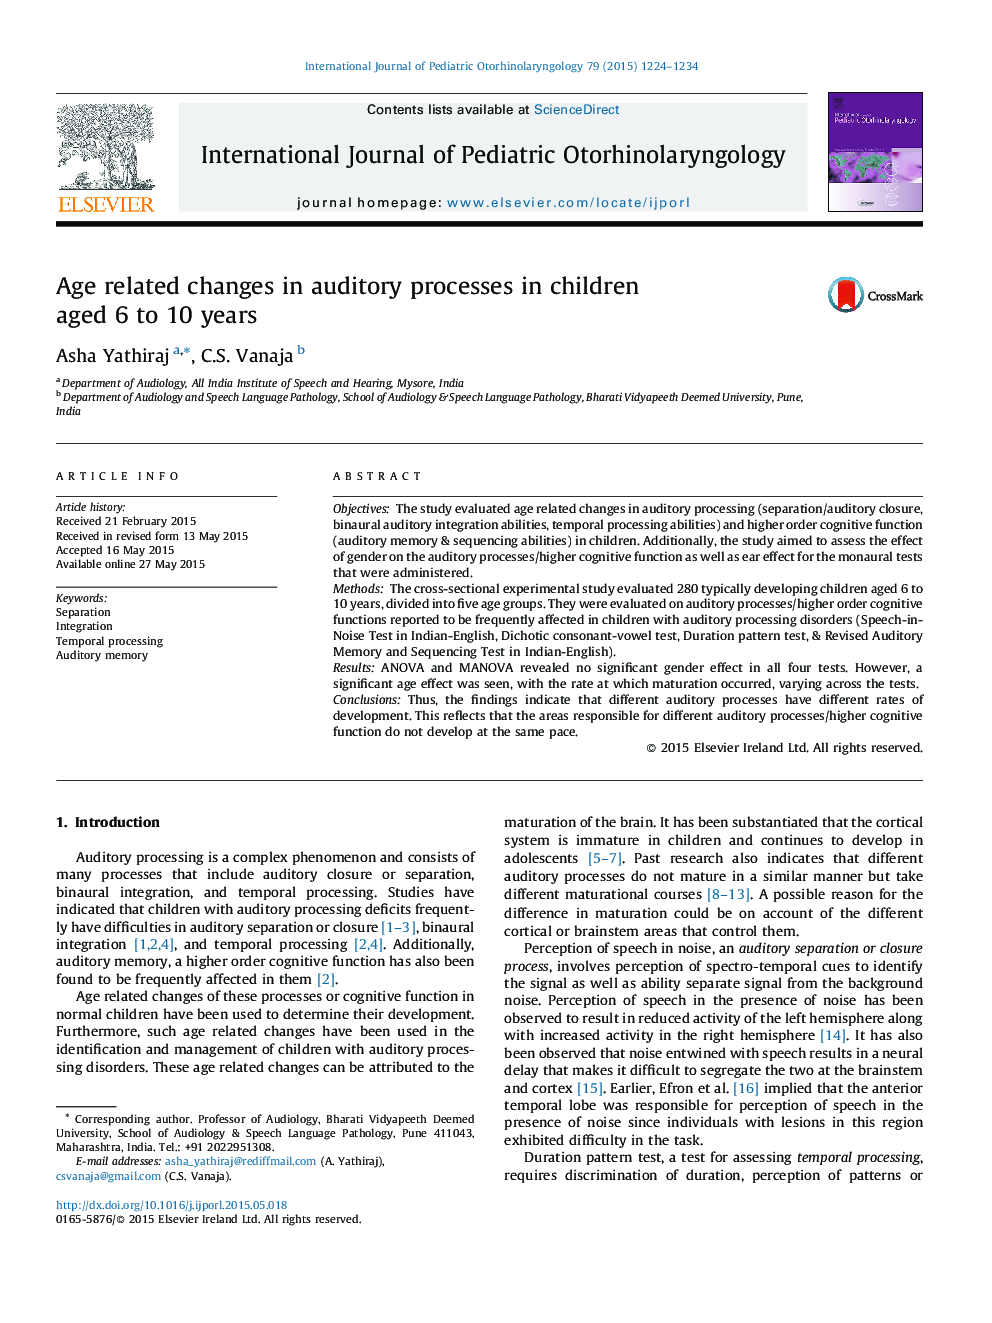 Age related changes in auditory processes in children aged 6 to 10 years